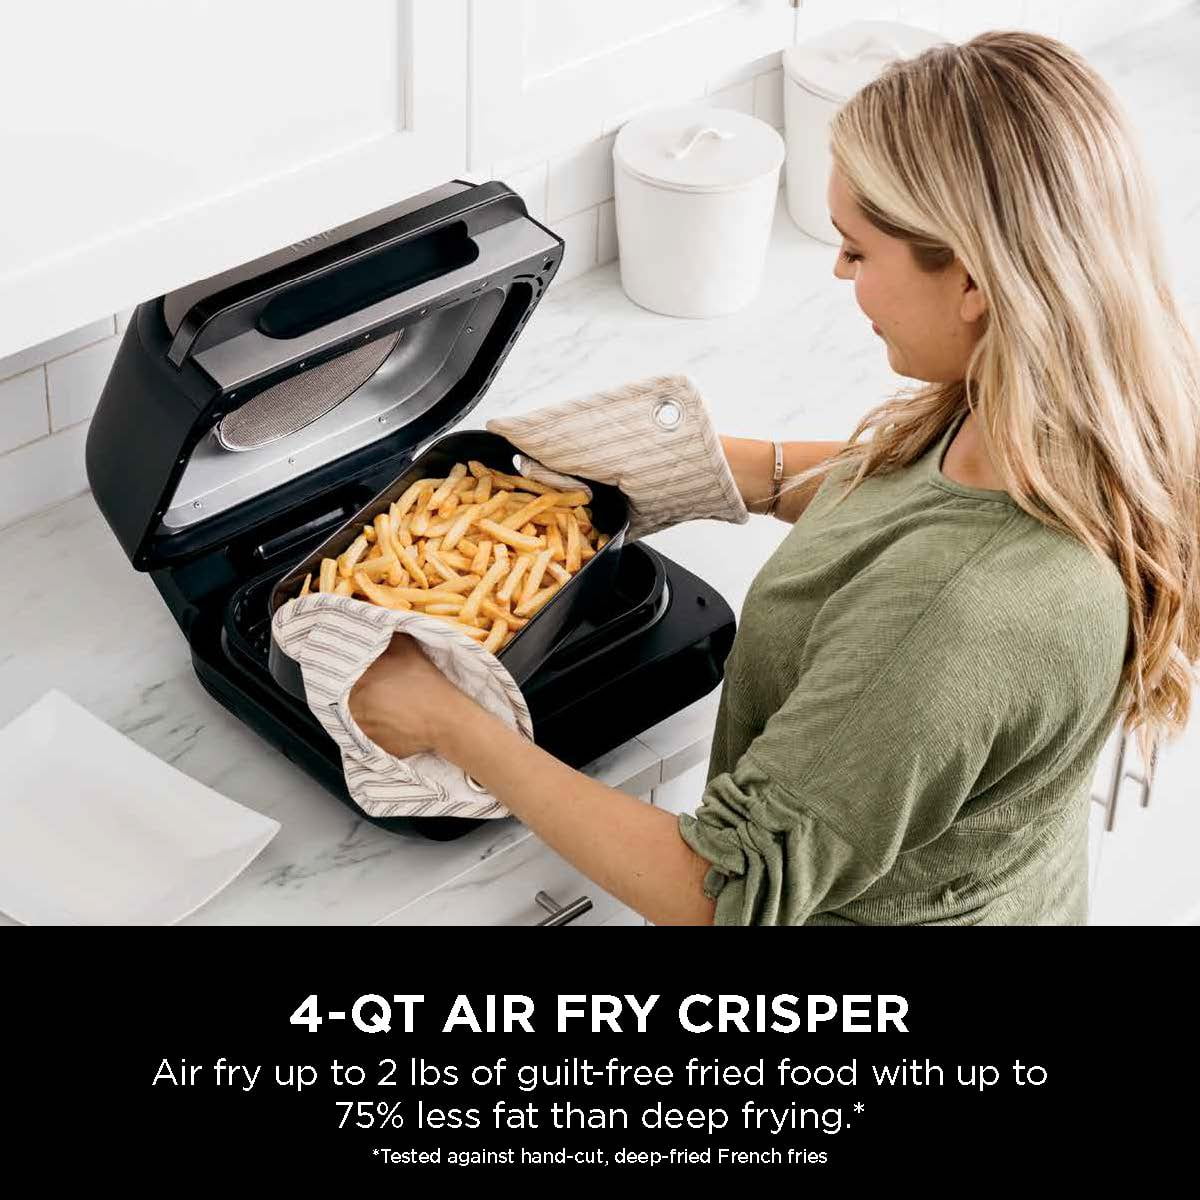 Ninja Foodi 4-in-1 Indoor Grill and Air Fryer - Black/Silver (AG300BF)  622356589512